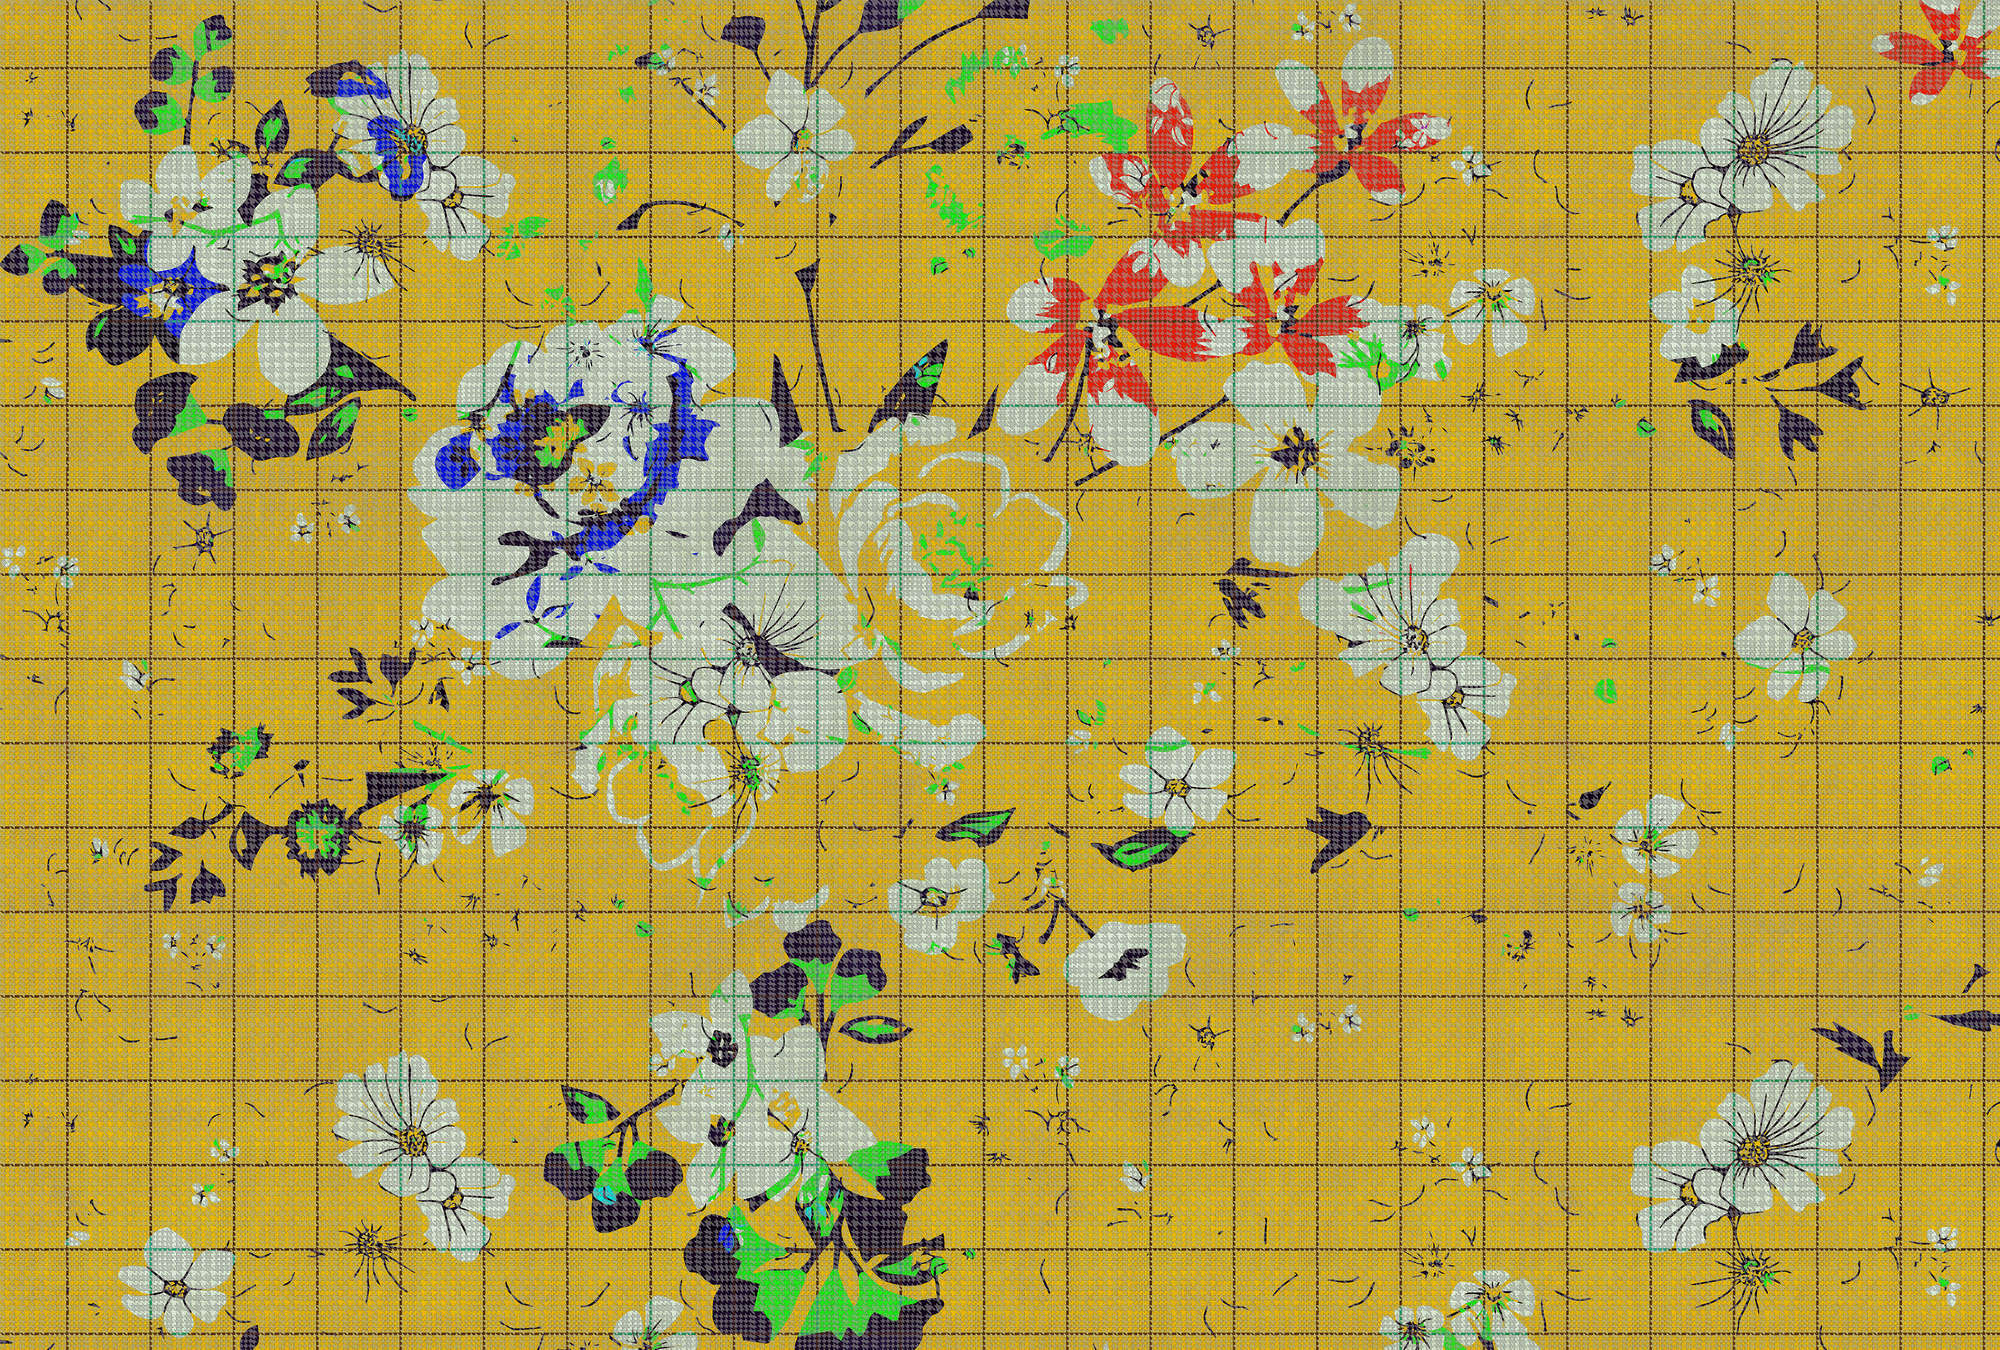             Flower plaid 1 - Photo wallpaper colourful flower mosaic yellow with checkered optic - Blue, Yellow | structure non-woven
        